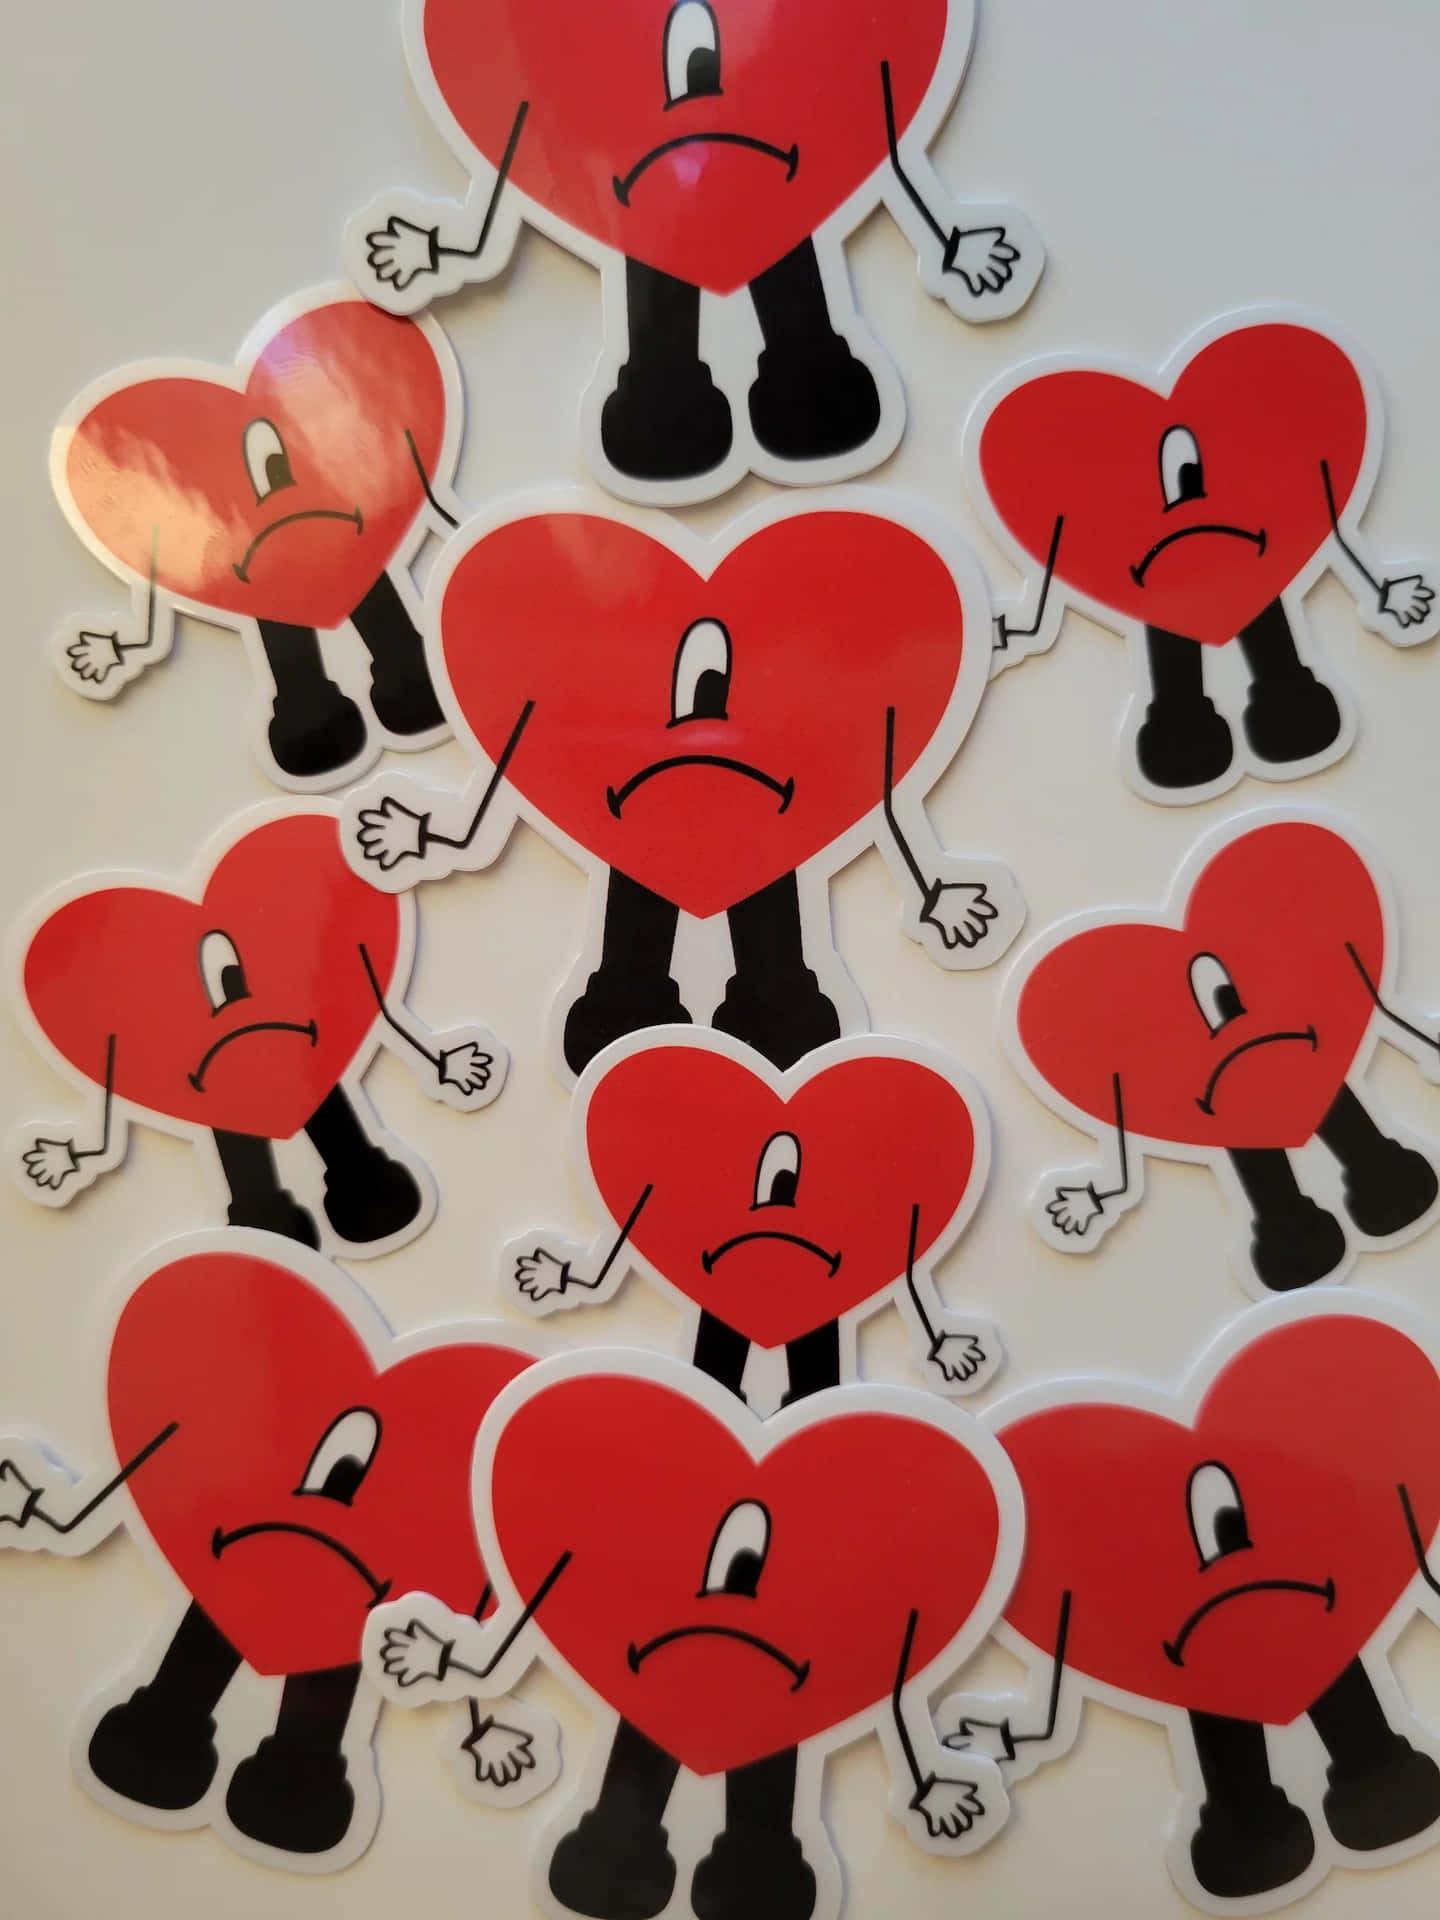 Sad Heart Stickers Collection Wallpaper